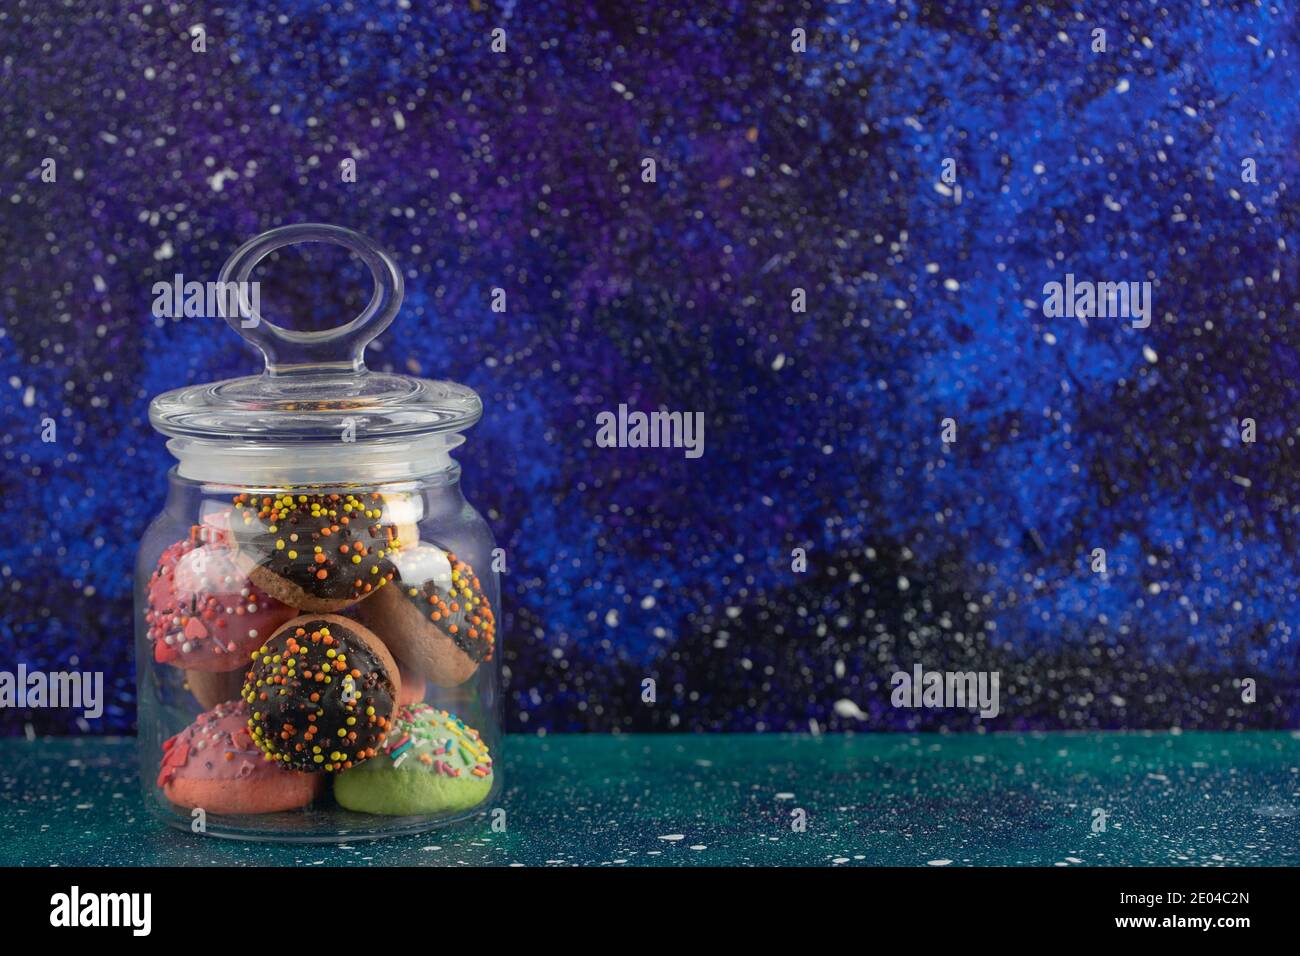 A glass jar full of small colorful doughnuts Stock Photo